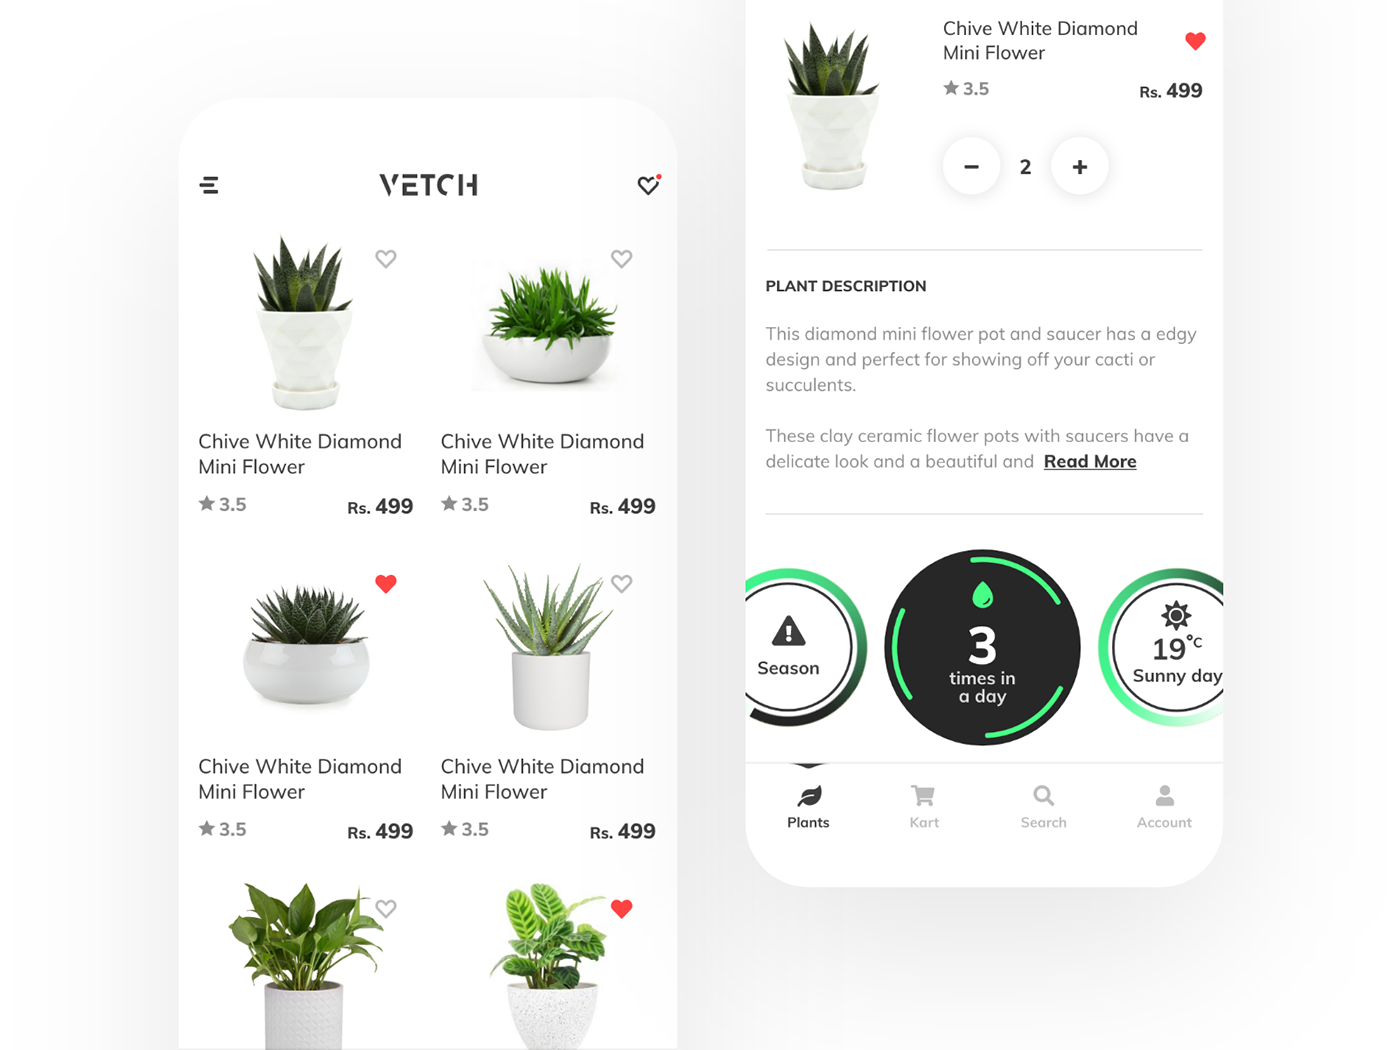 adobexd awesomedesign Behance Ecommerce interfacedesign photoshop Plant simple Simpleui ux